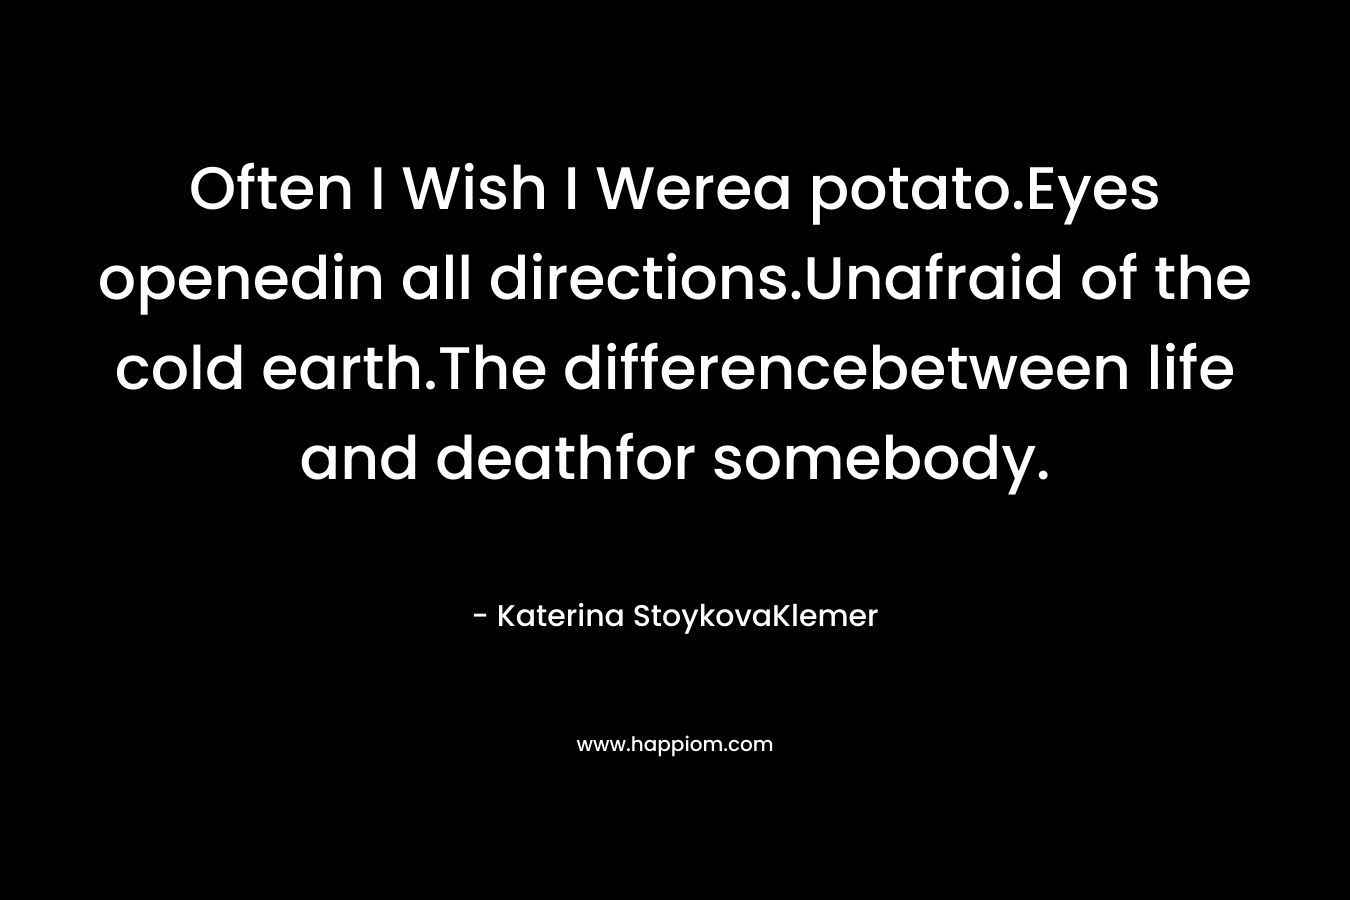 Often I Wish I Werea potato.Eyes openedin all directions.Unafraid of the cold earth.The differencebetween life and deathfor somebody.